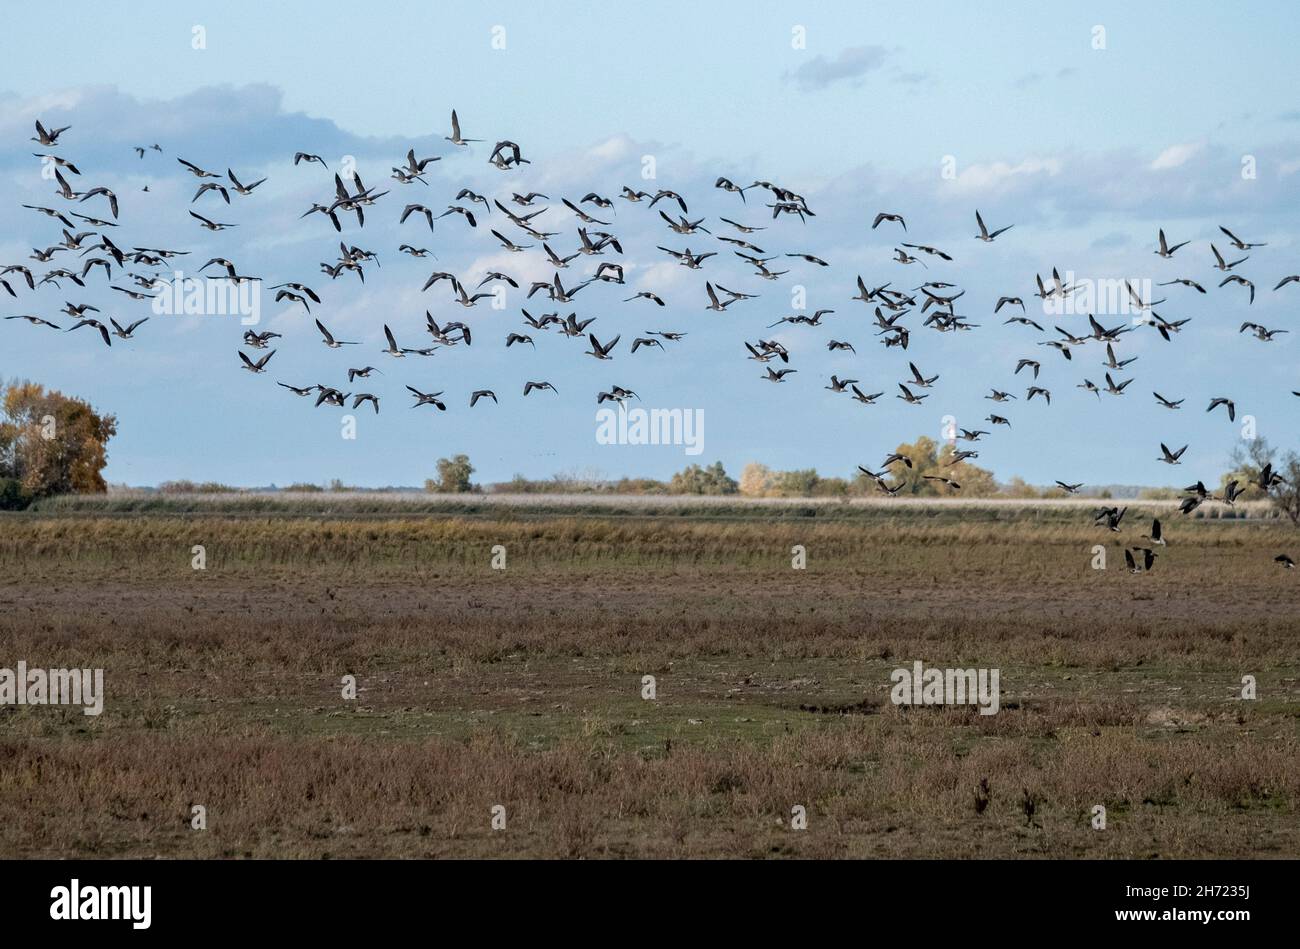 Flocks of wild geese  flying above a field,  Hortobagy National Park, Hungary Stock Photo